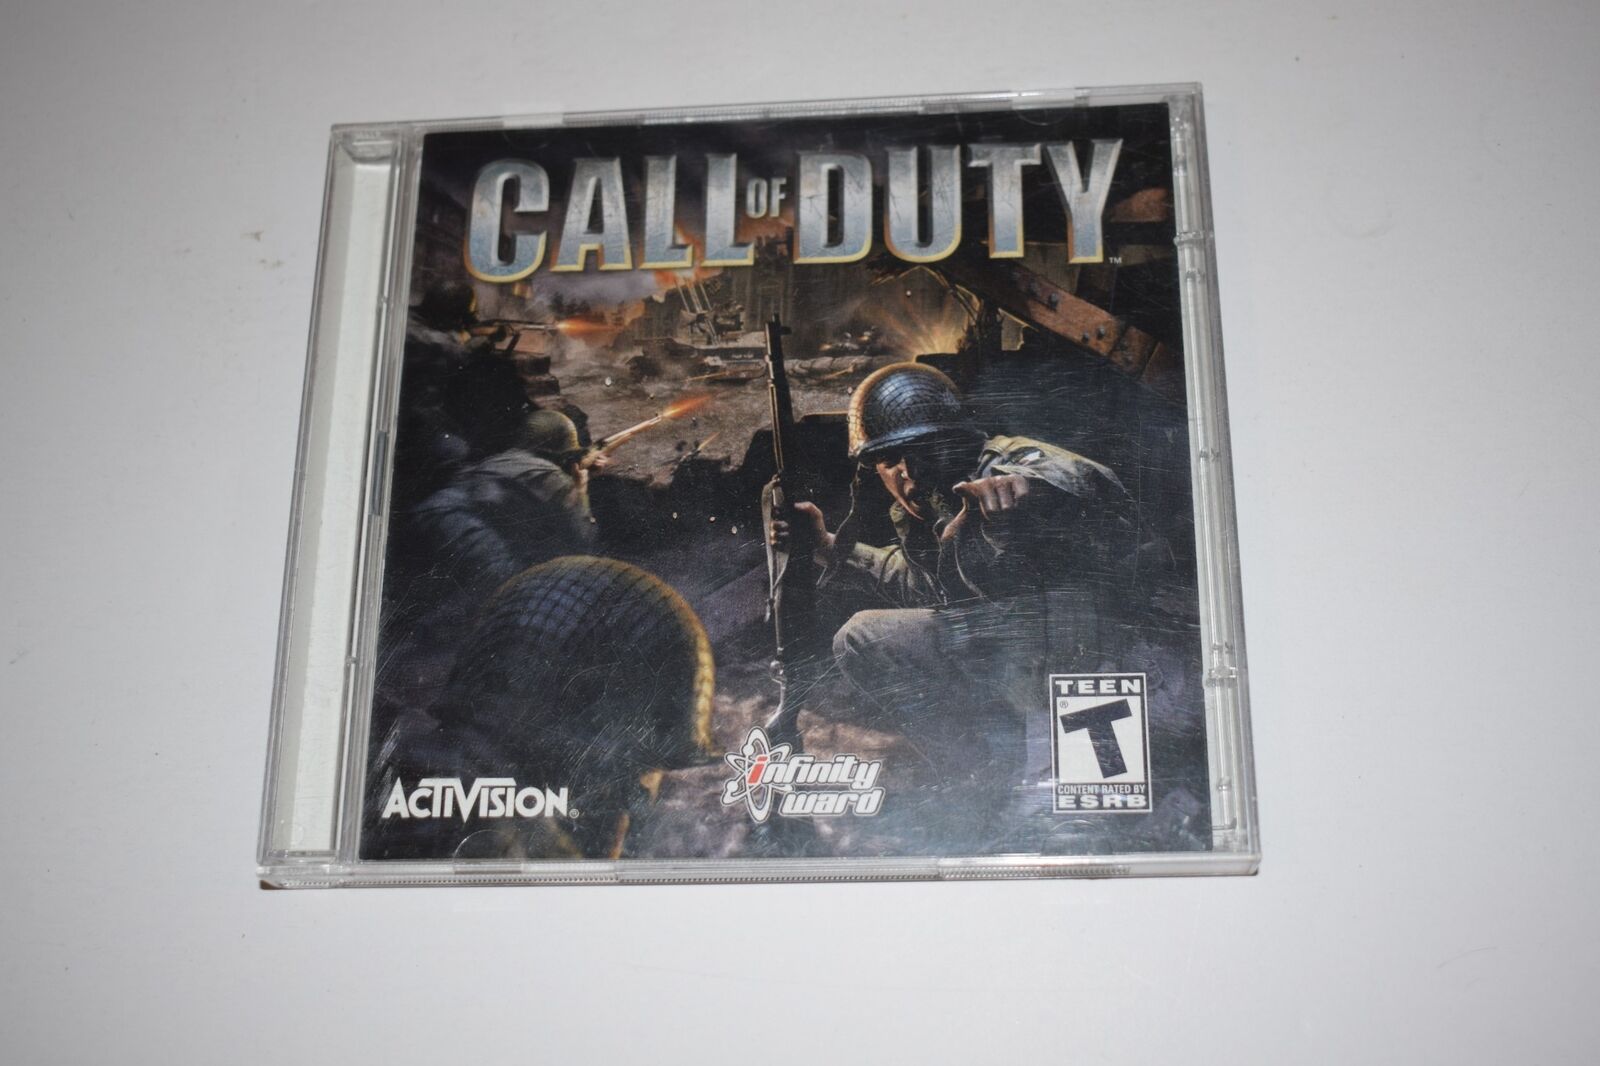 CALL OF DUTY 2004  PC GAME  (MVY65)